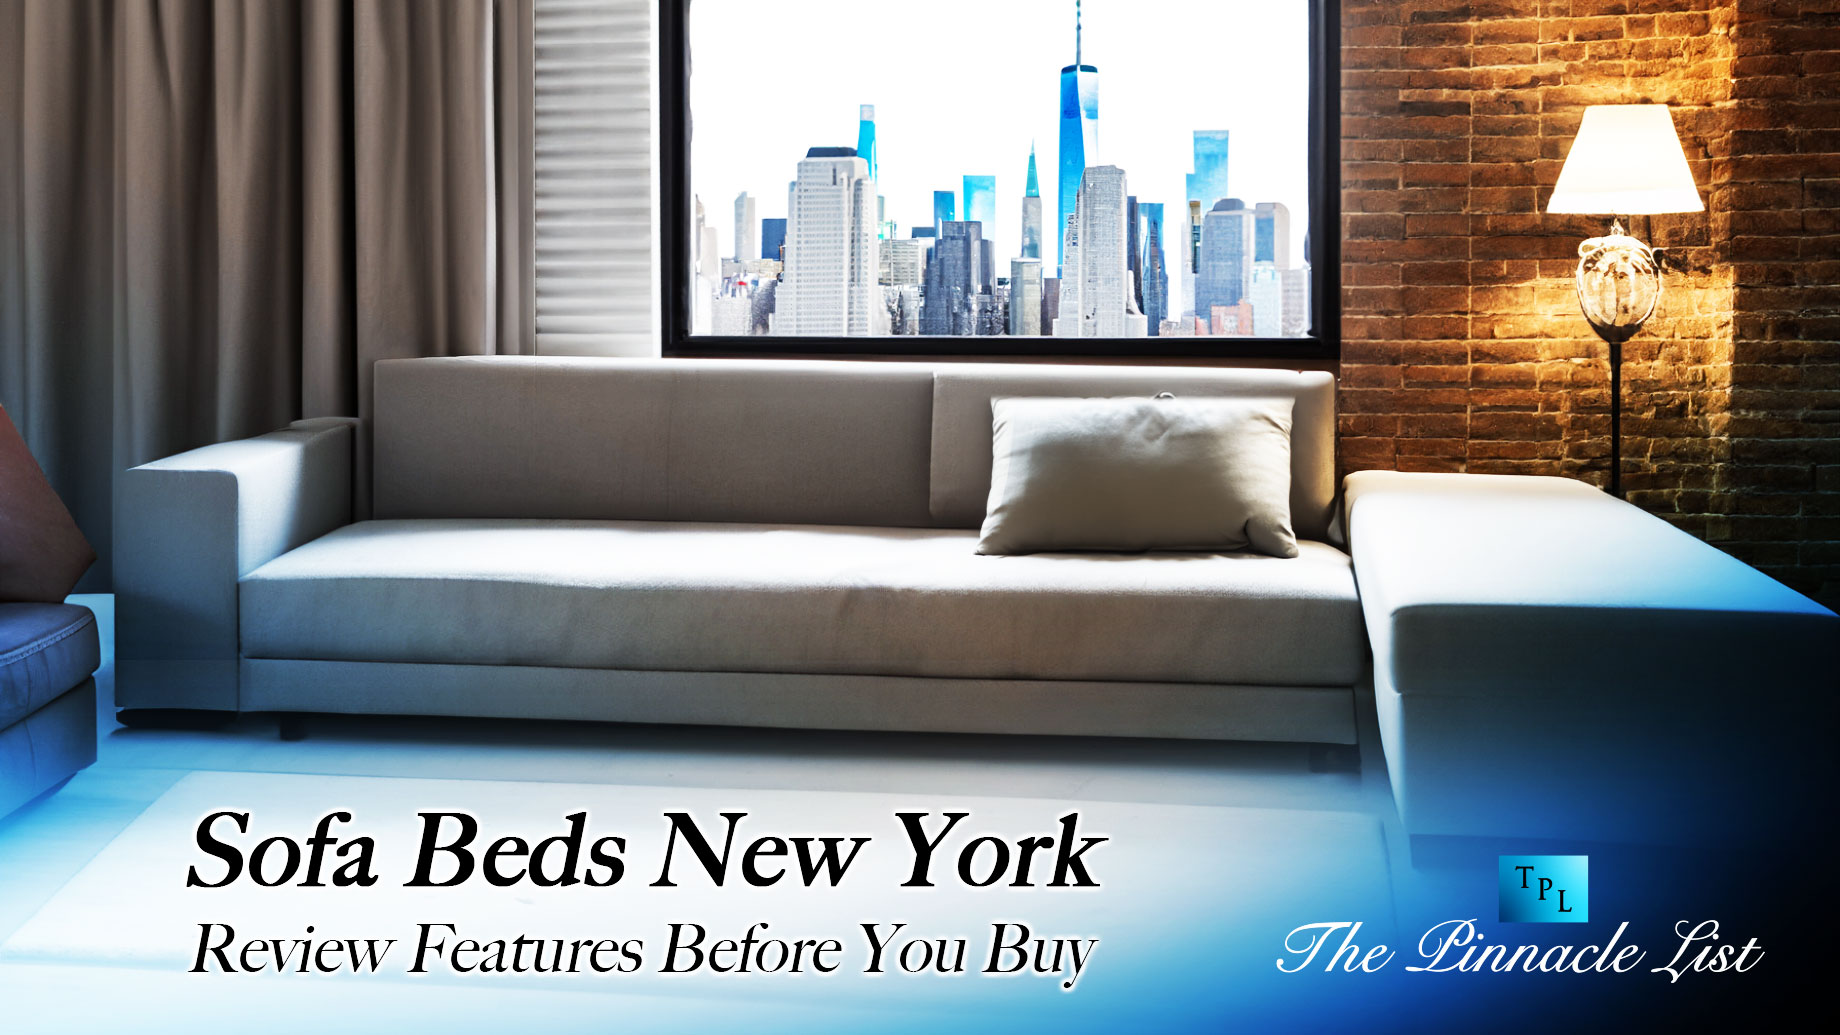 Sofa Beds New York: Review Features Before You Buy